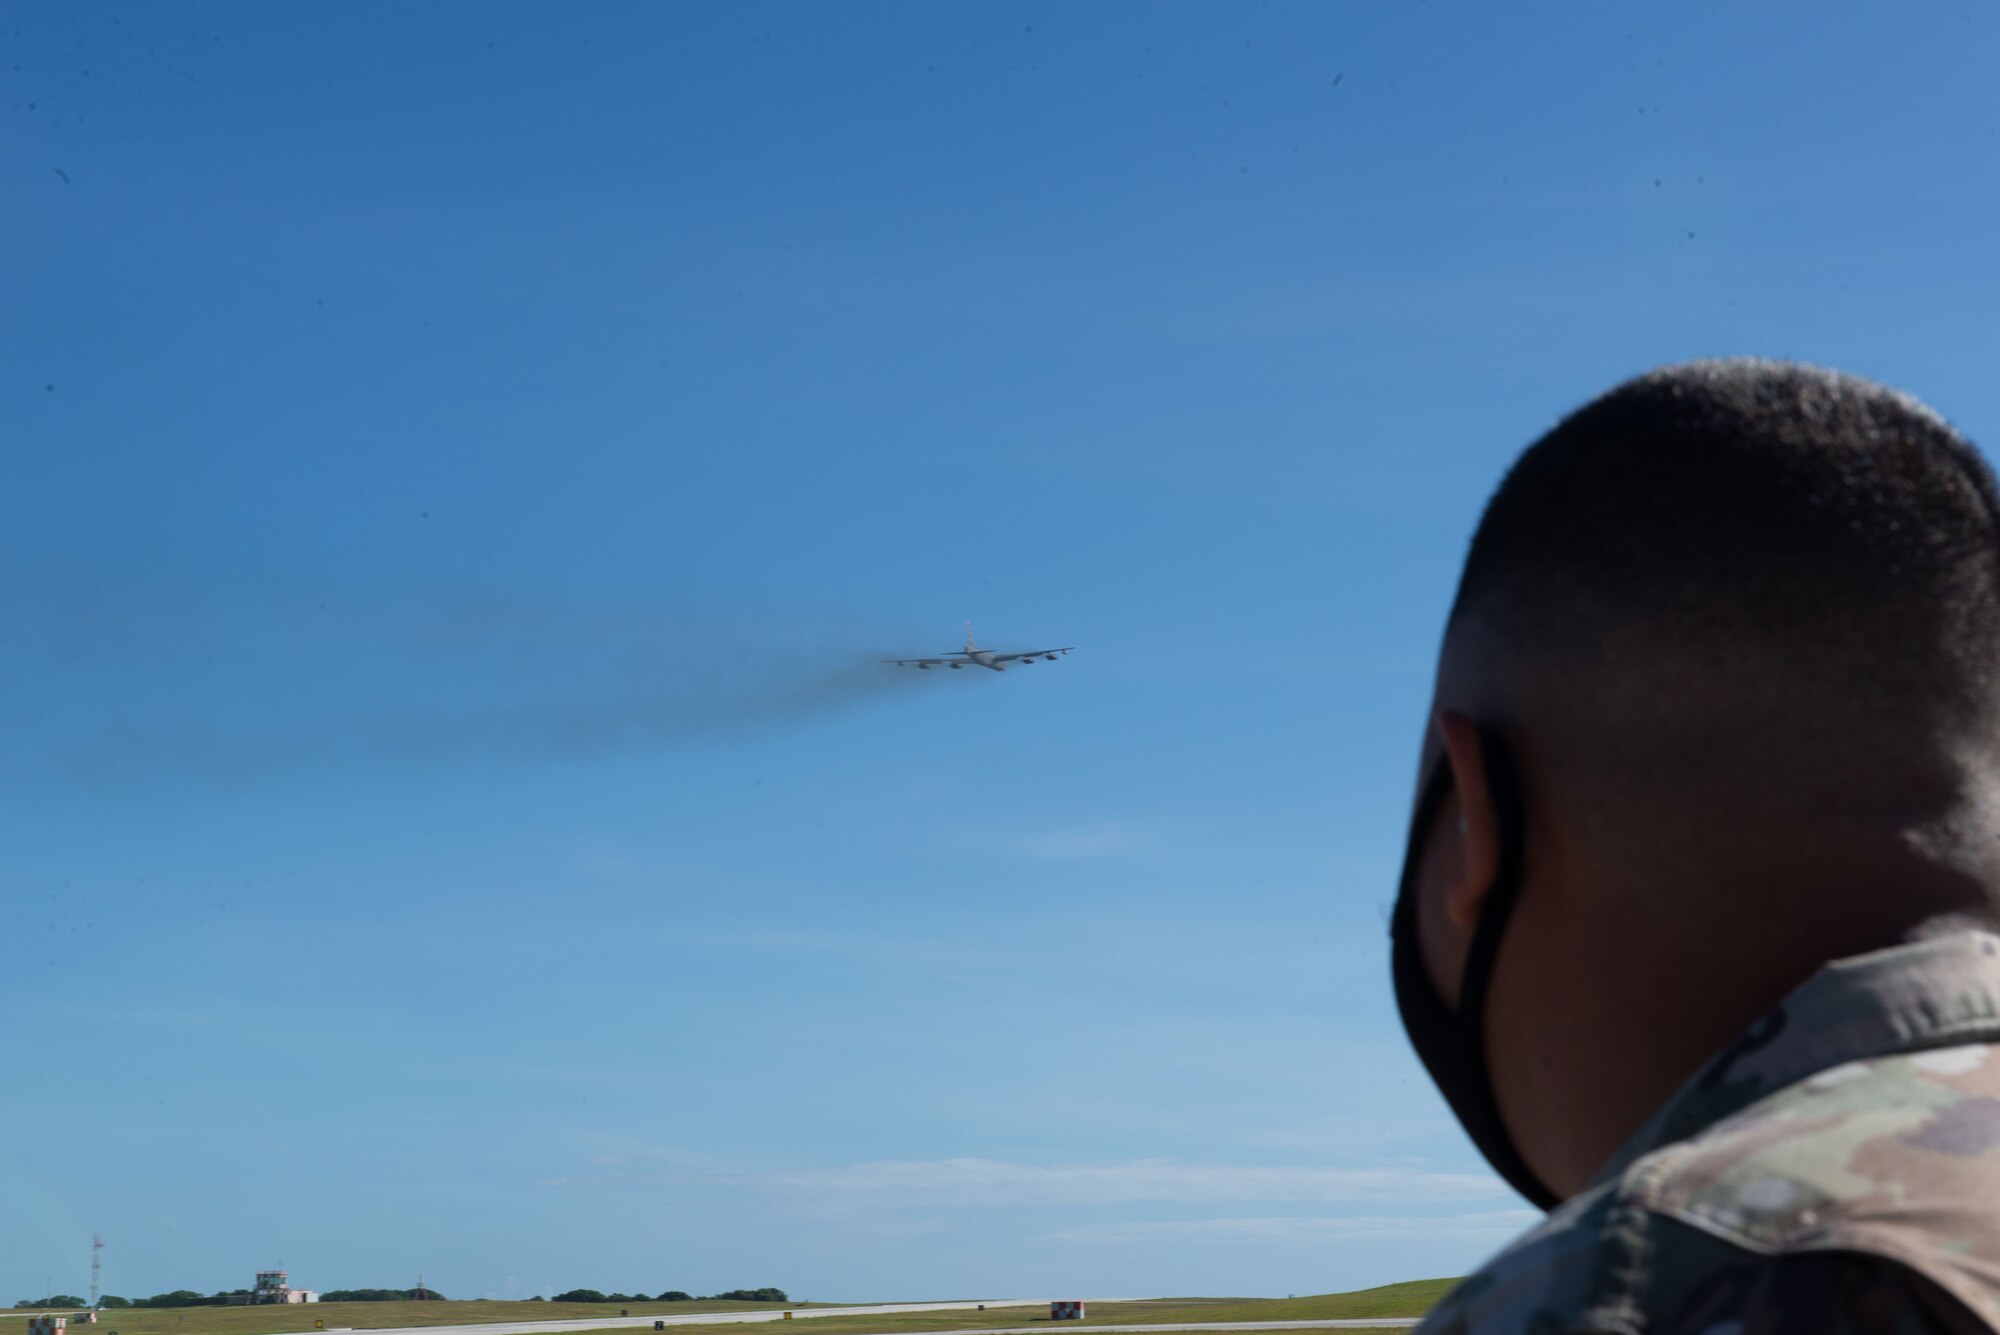 Staff Sergeant Ian Leyco, 36th Contingency Response Group, watches a B-52 Stratofortress take off from Andersen Air Force Base, Guam, Feb. 10, 2021.